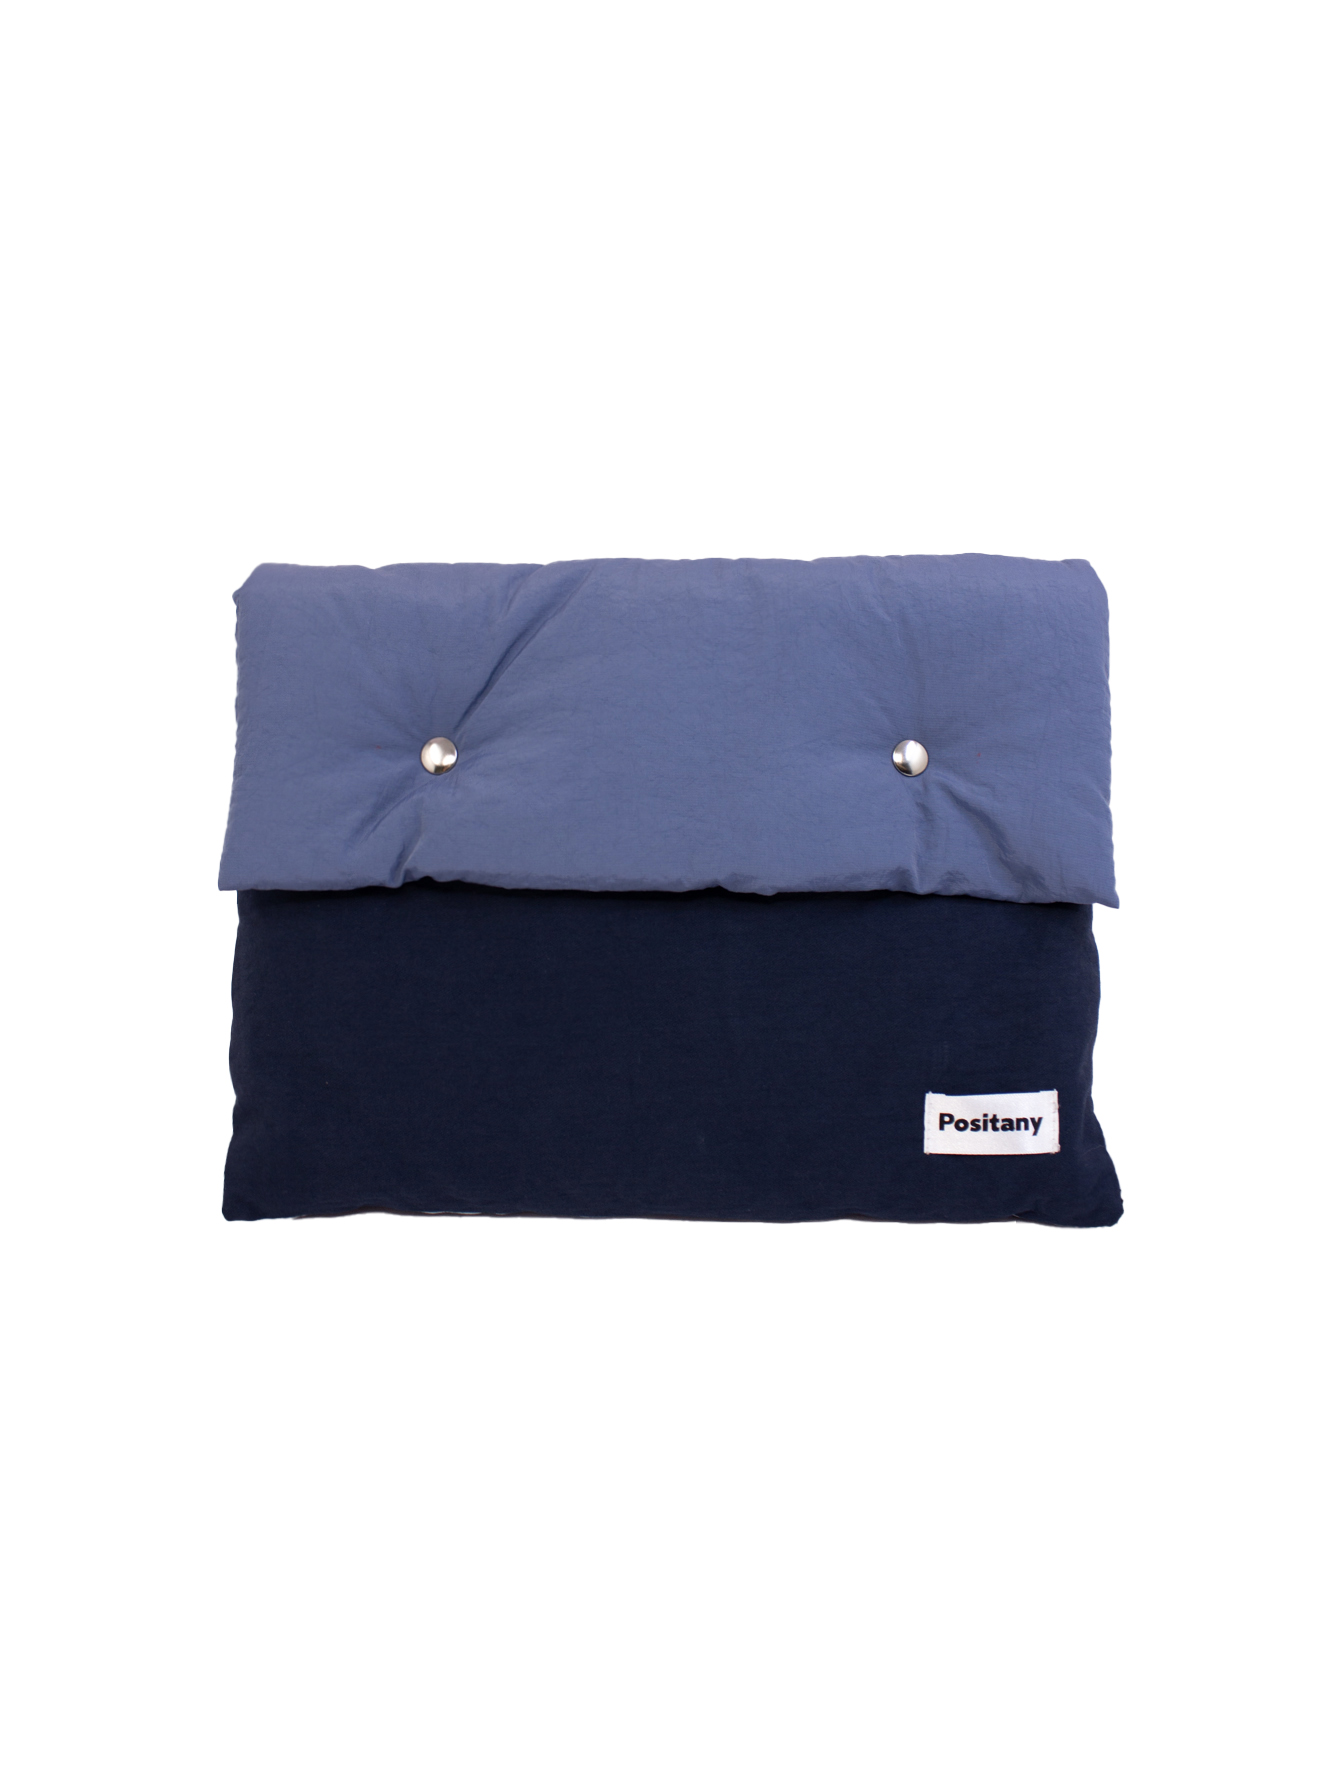 Button pouch (NAVY)